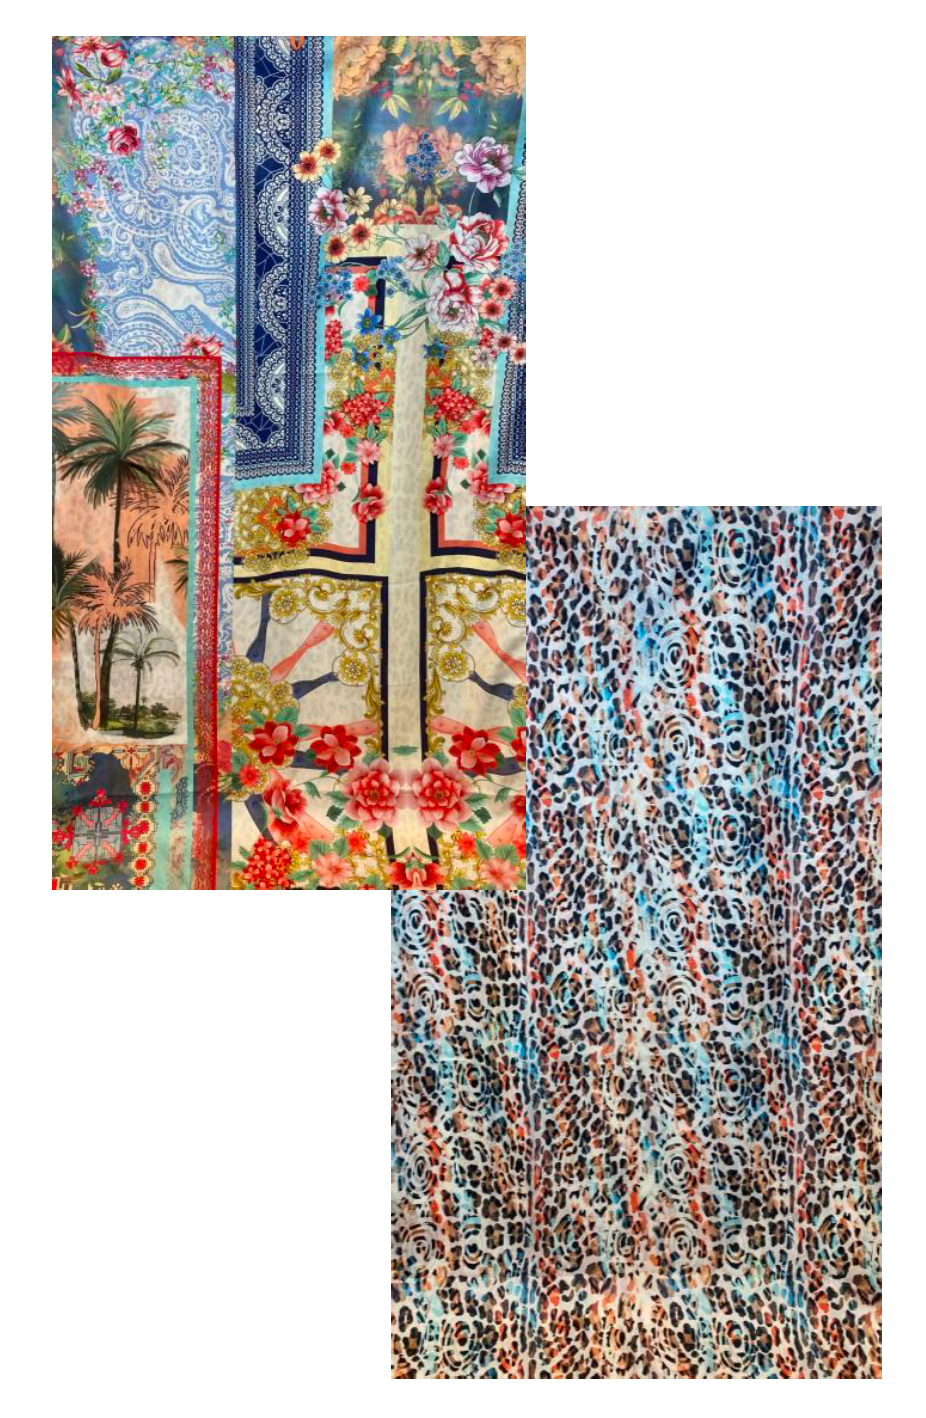 Johnny Was tropical block beach towel with palm trees, florals, paisley, bold leopard, vintage flowers in a patchwork design